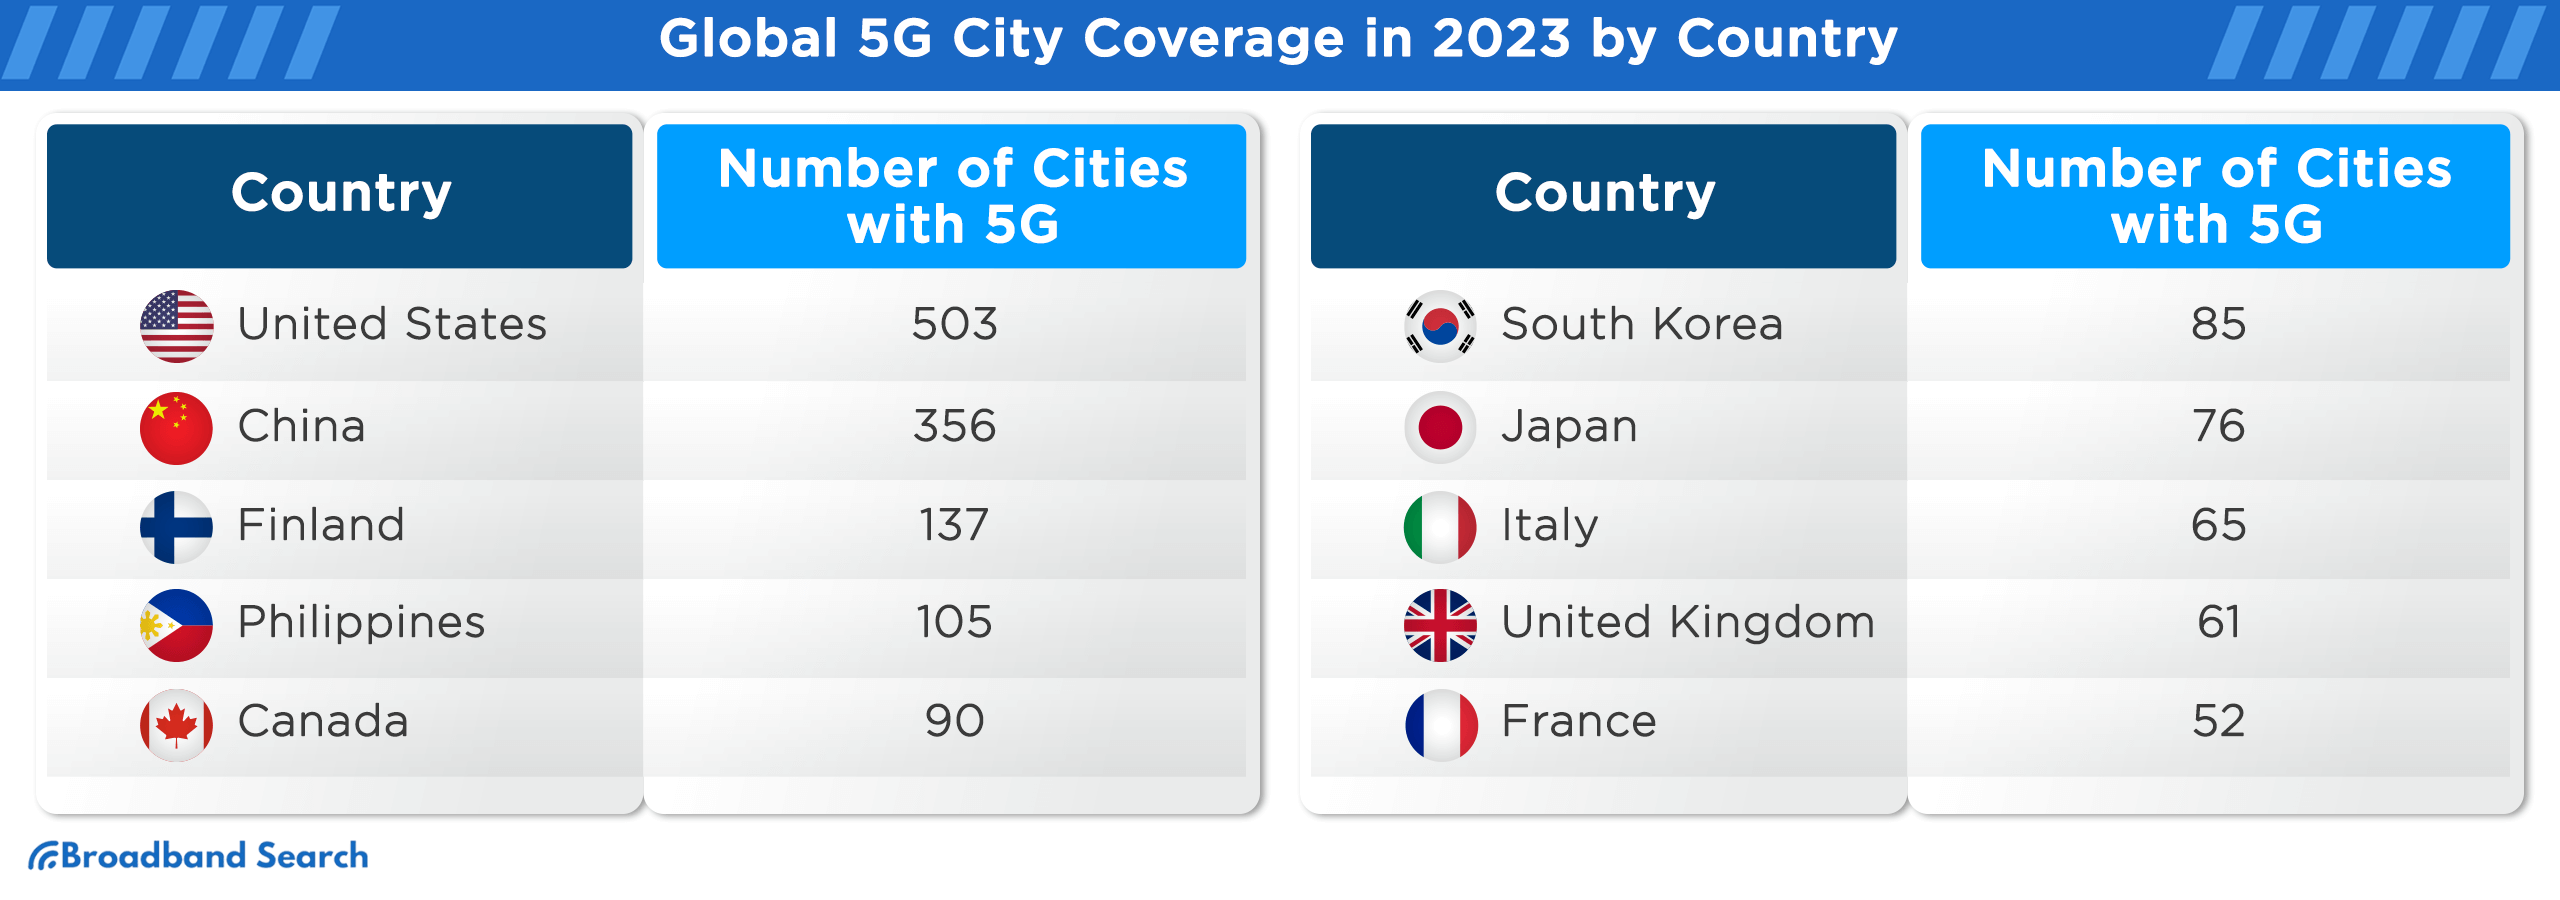 Global 5G City Coverage in 2023 by Country